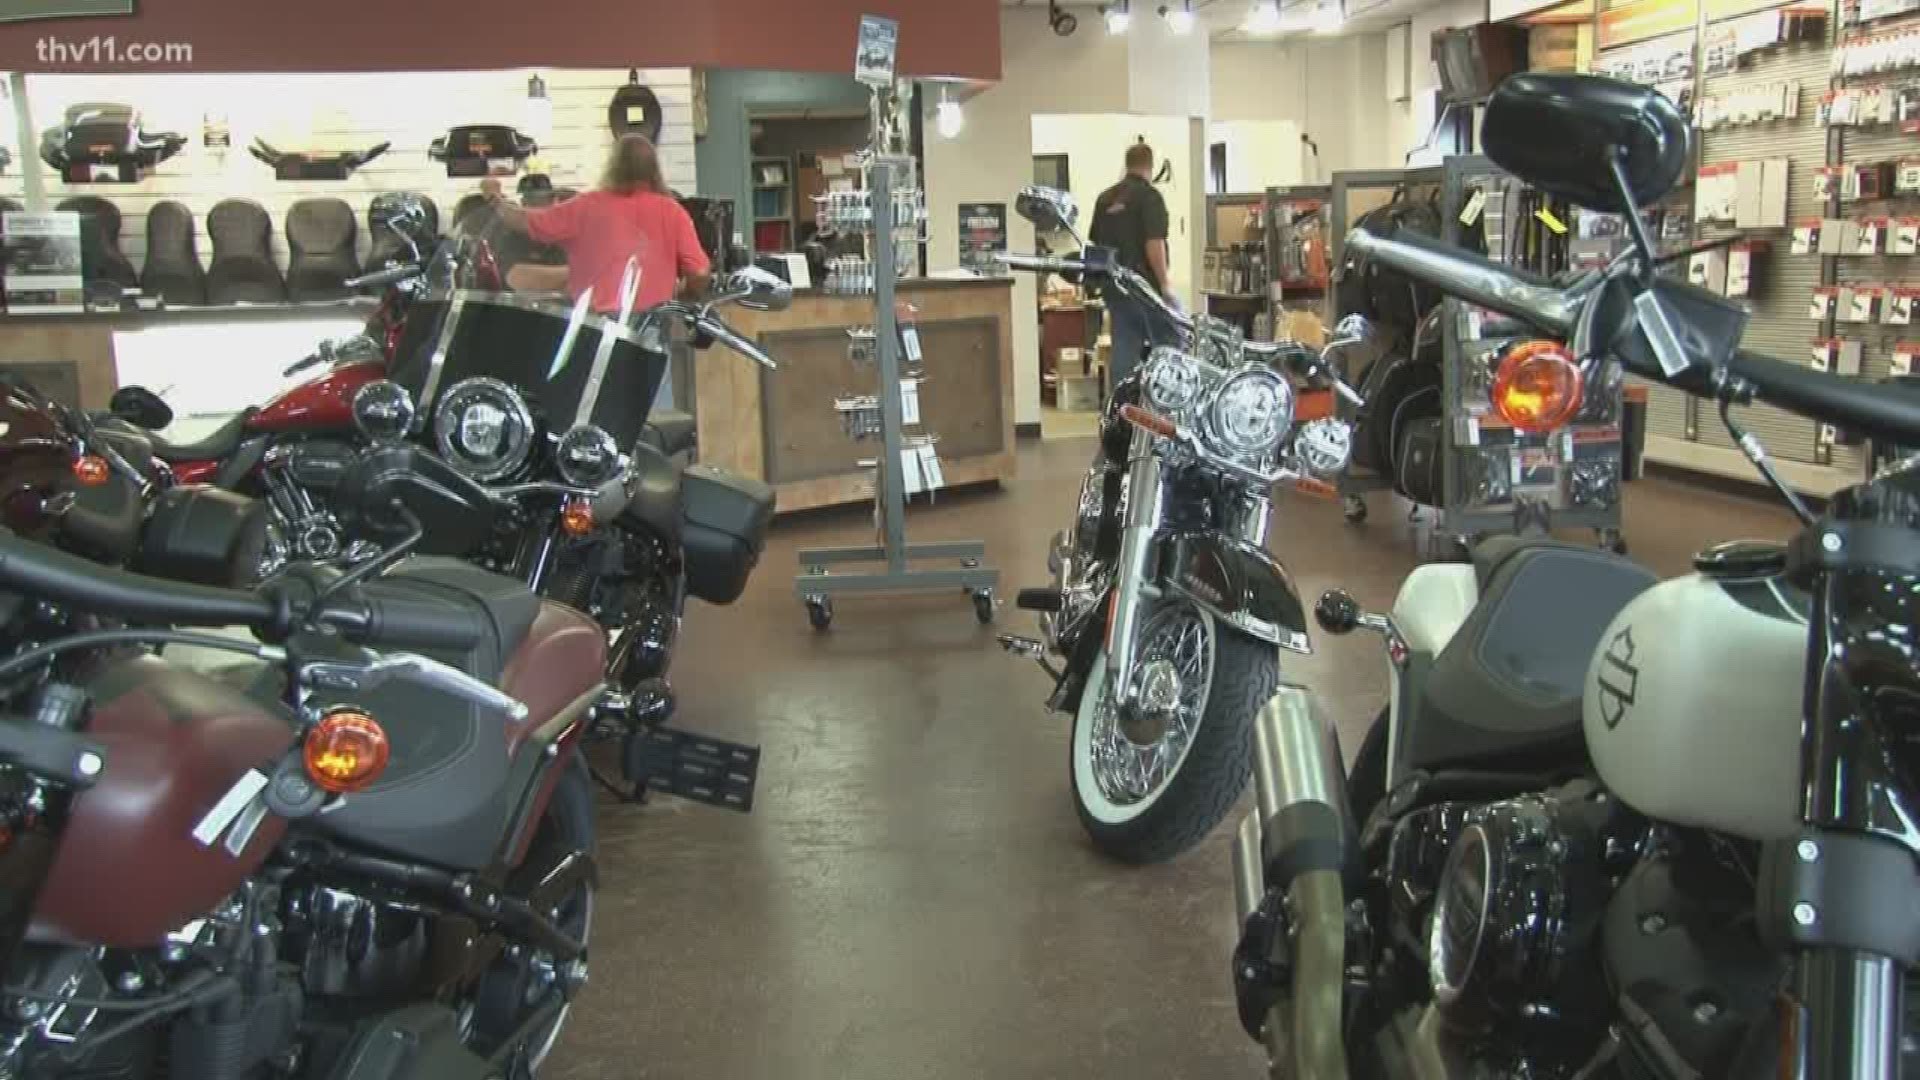 The area near the Outlets of Little Rock has quickly become the place-to-be, causing a new Hardley Davidson dealership to move in next door.